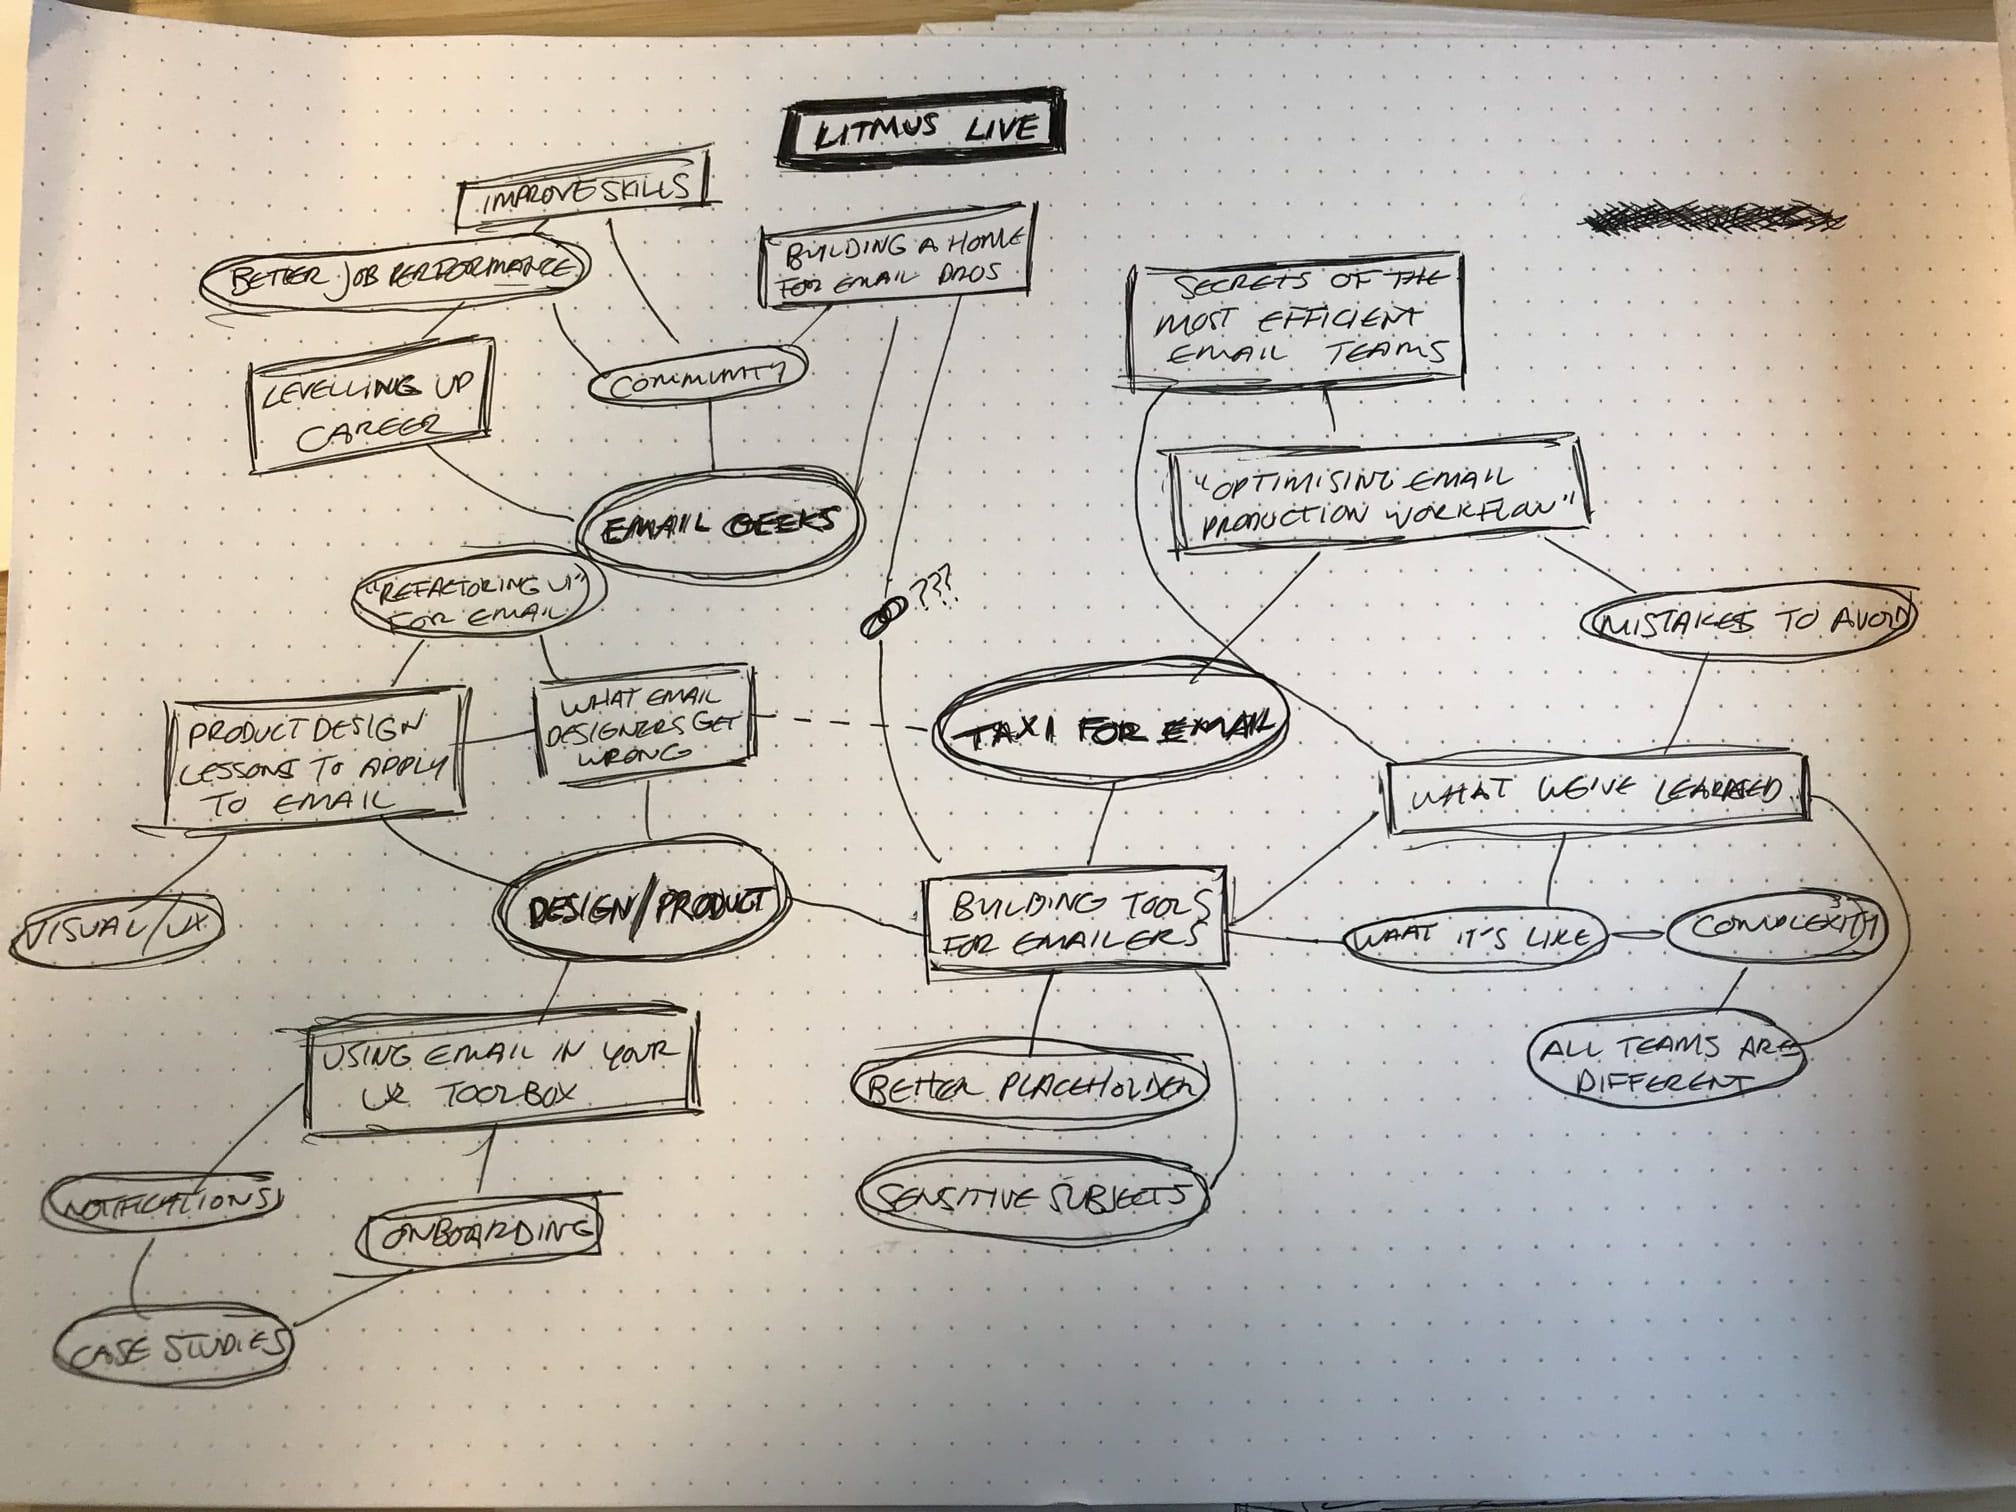 A notepad with a mindmap of possible speaking topics about email design and production